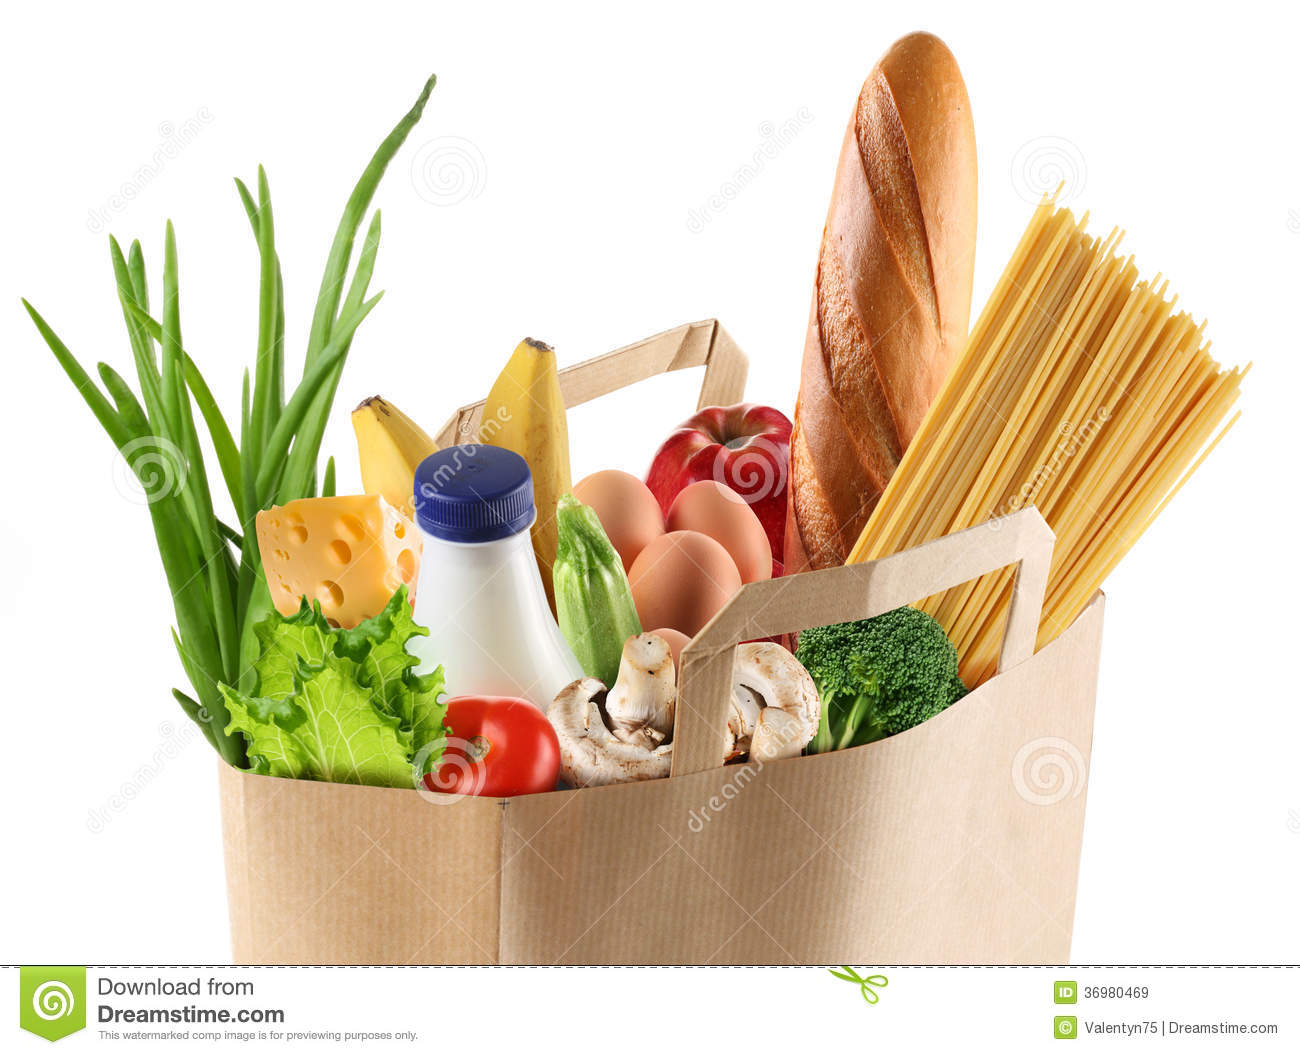 Paper Bag With Food On A White Background Mr No Pr No 4 591 14